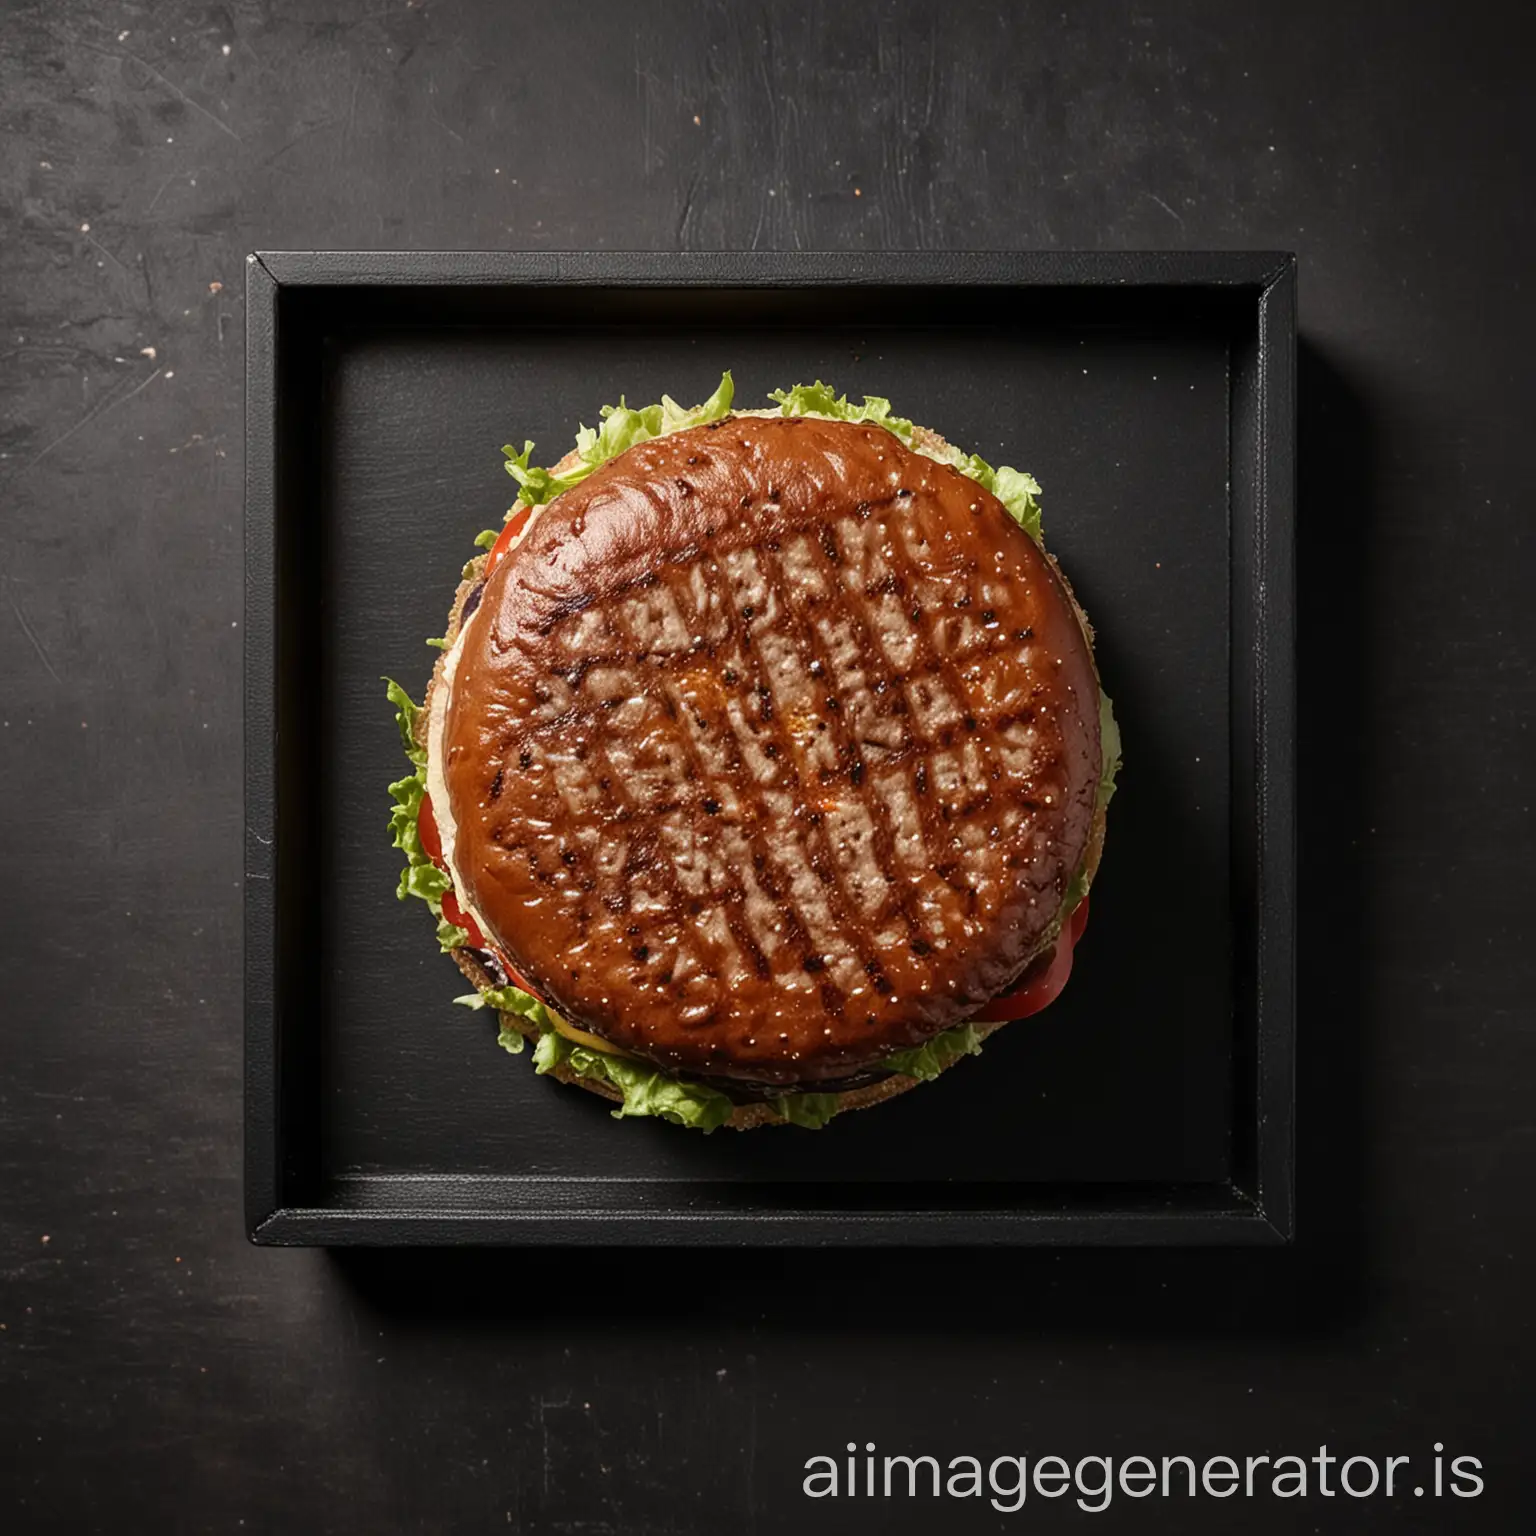 Flat-and-Pressed-Burger-on-Black-Box-Delicious-Fast-Food-Concept